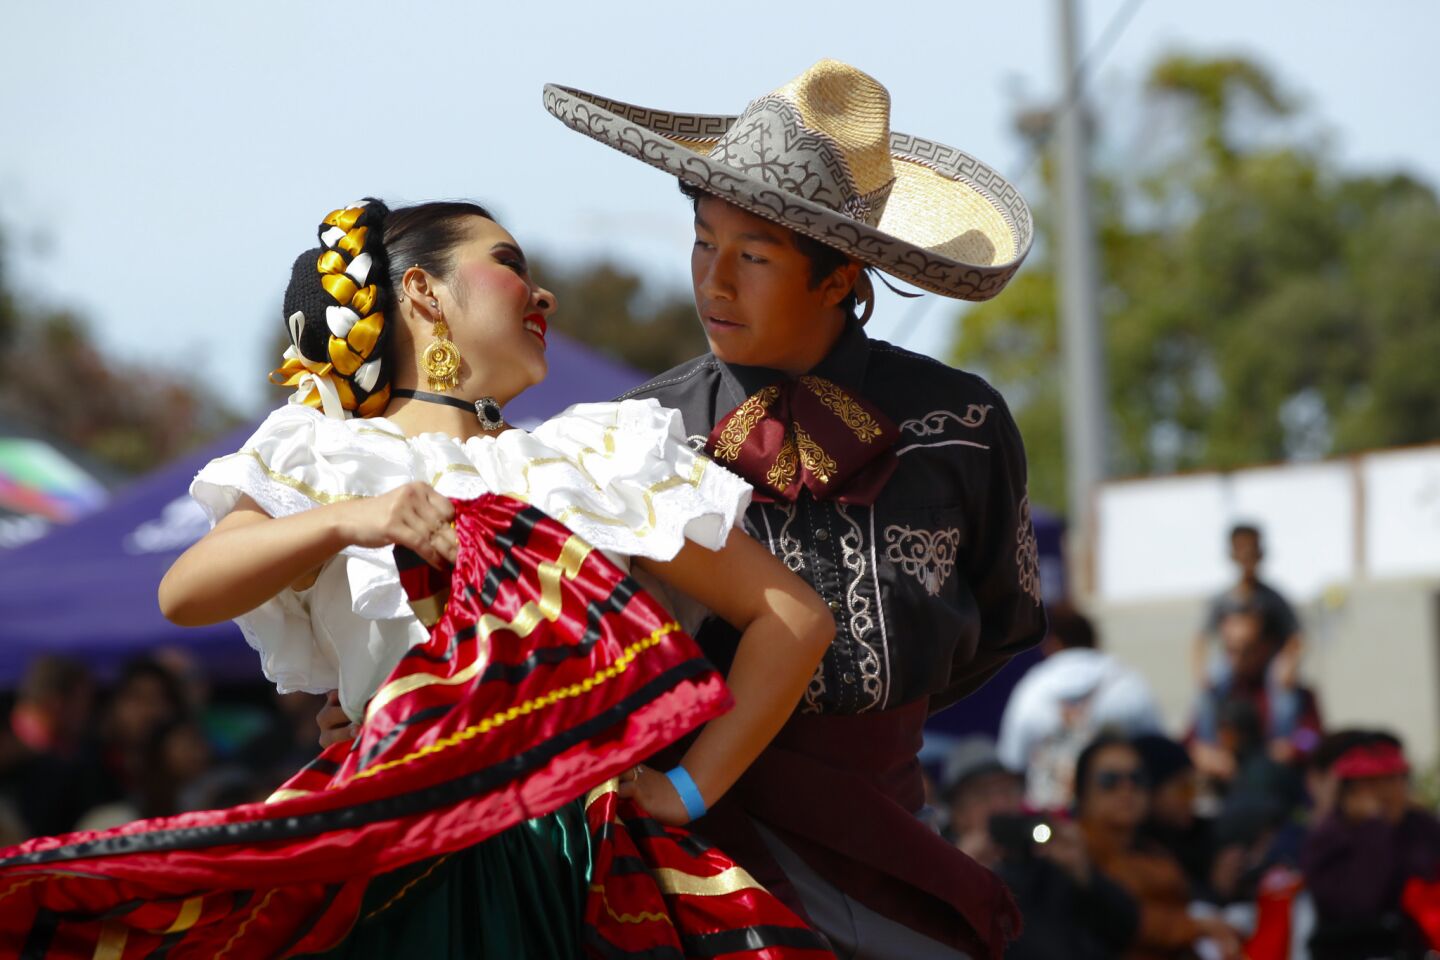 Dancers from the group, Danza Folklorica Nanahuatzin danced several number for the crowd at the annual International Mariachi Festival in National City.